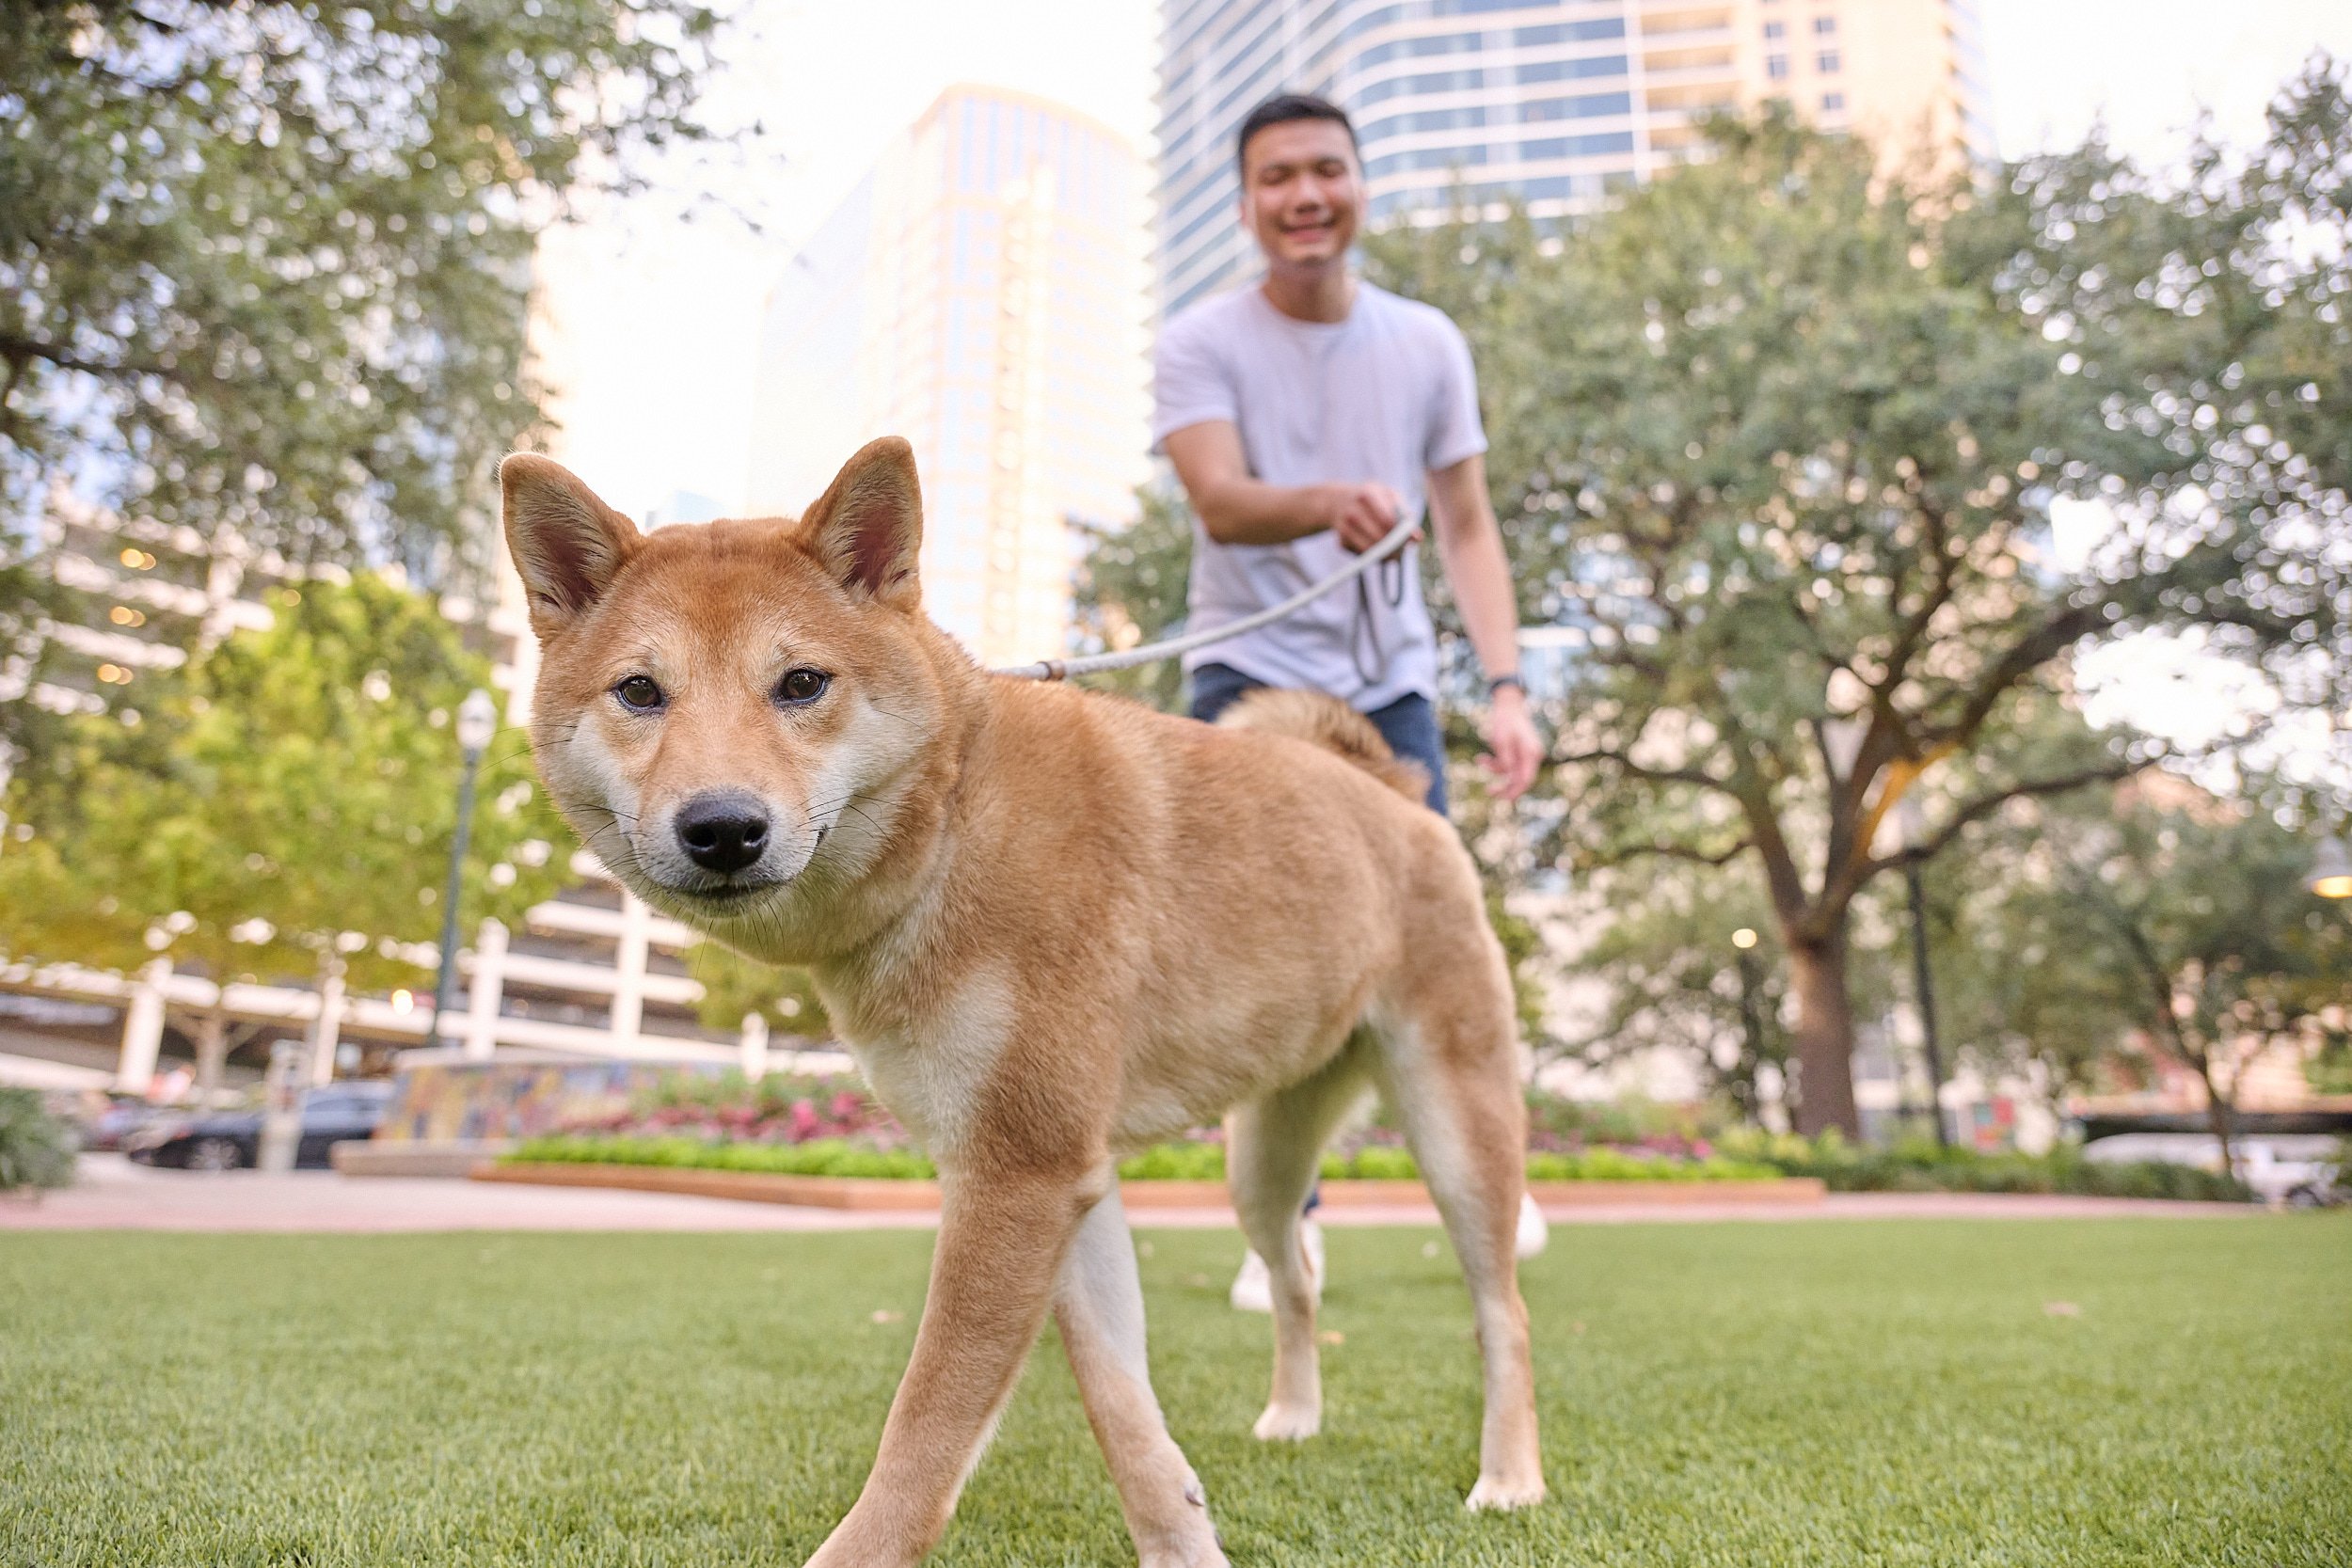  HOUSTON, TEXAS - AUGUST 27TH 2022: Yosa Puspo is posing in a suit with his dog for fun and memorable portraits in Downtown Houston. Market Square, Main Street and cityscape are perfect backgrounds. 